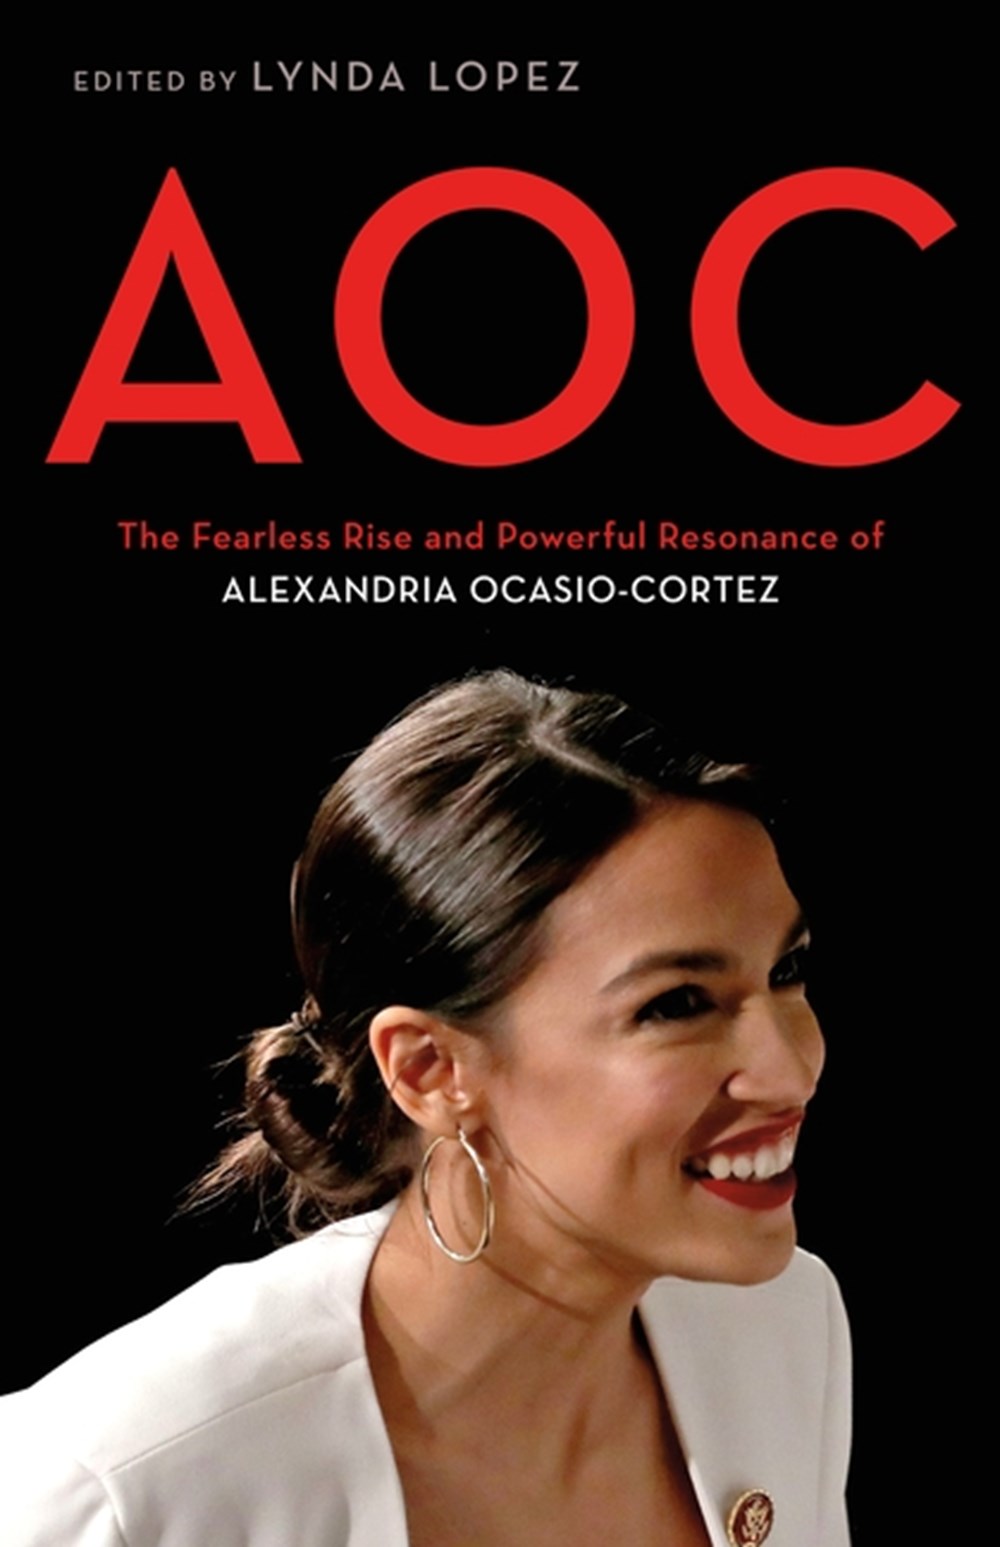 Aoc The Fearless Rise and Powerful Resonance of Alexandria Ocasio-Cortez